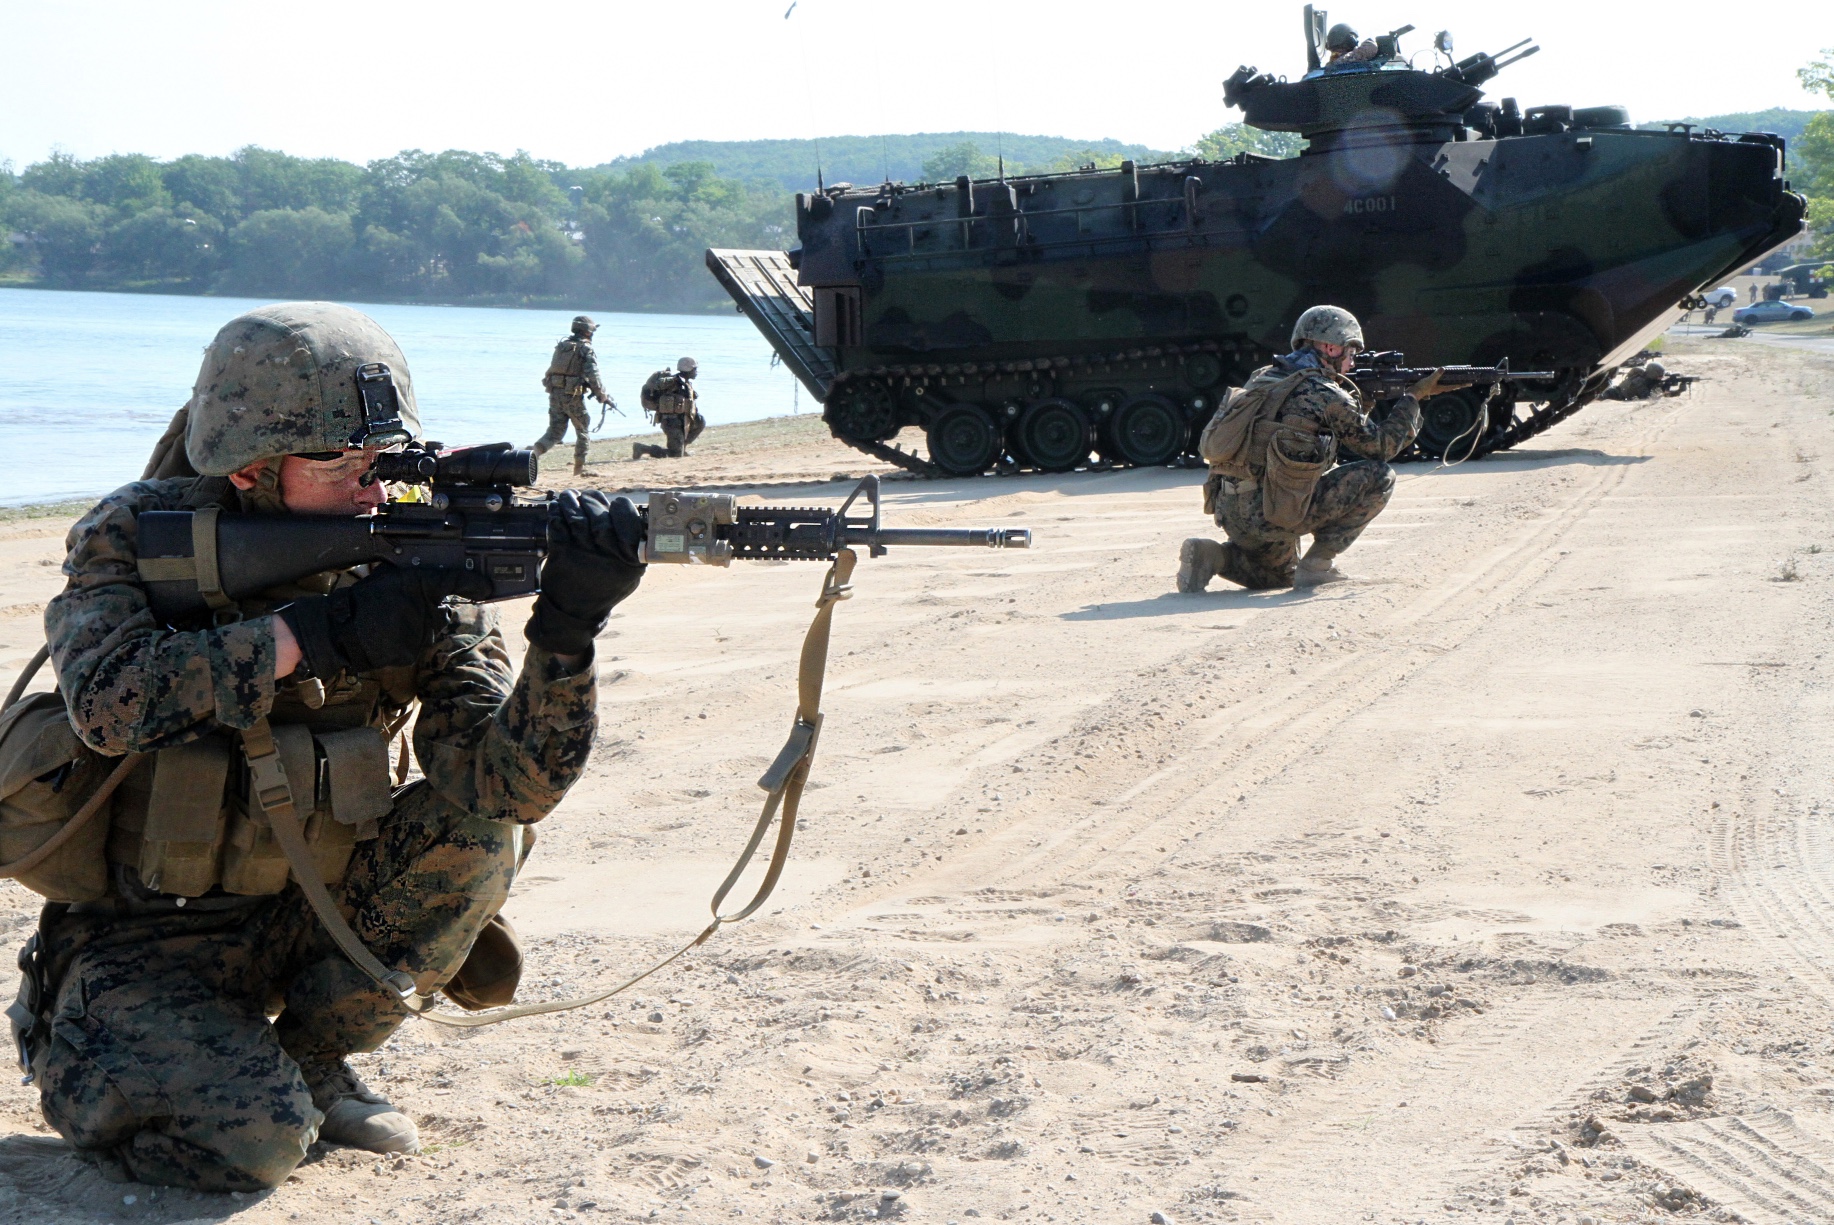 Marines from the 2nd Platoon, Company C, 4th Amphibious Assault Vehicle Battalion, based in Galveston, Texas, approach the shores of Lake Margrethe, Aug. 11, 2016, to rehearse security operations during an amphibious assault that is part of Northern Strike 2016